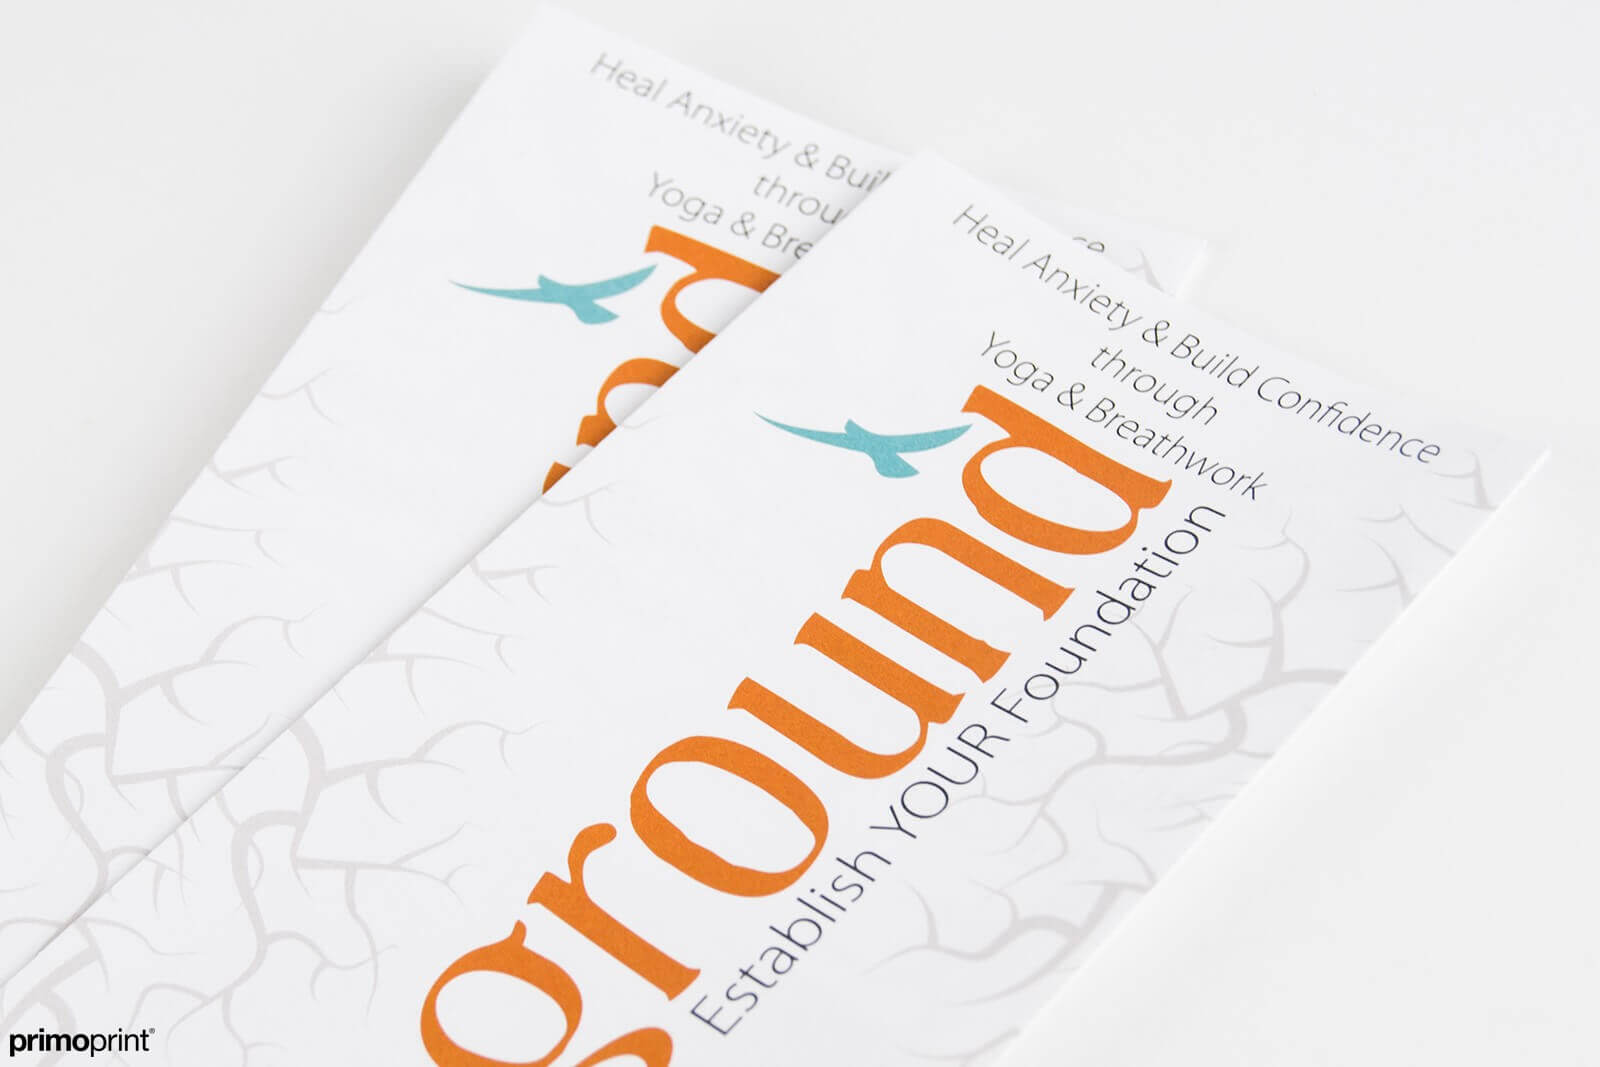 Uncoated 70LB text premium white brochures & flyers printed by Primoprint.